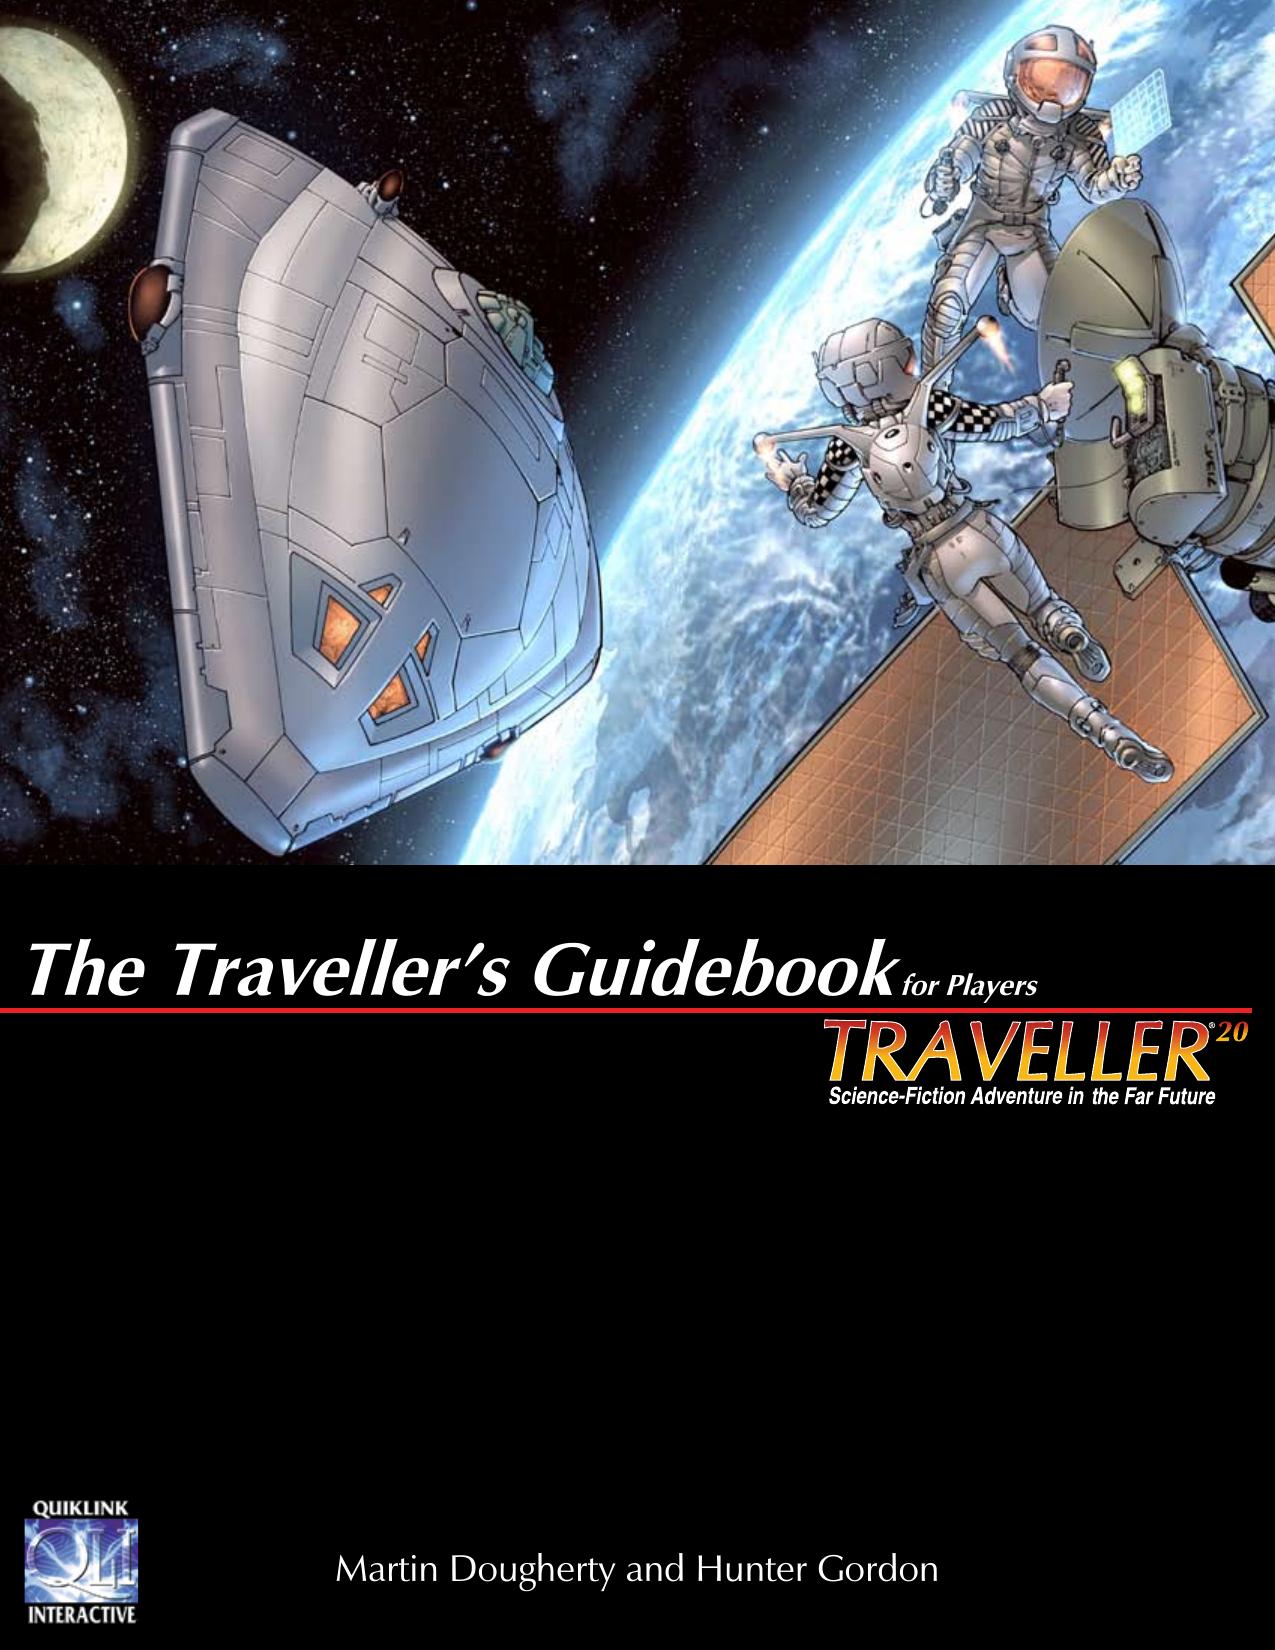 The Traveller's Guidebook for Players